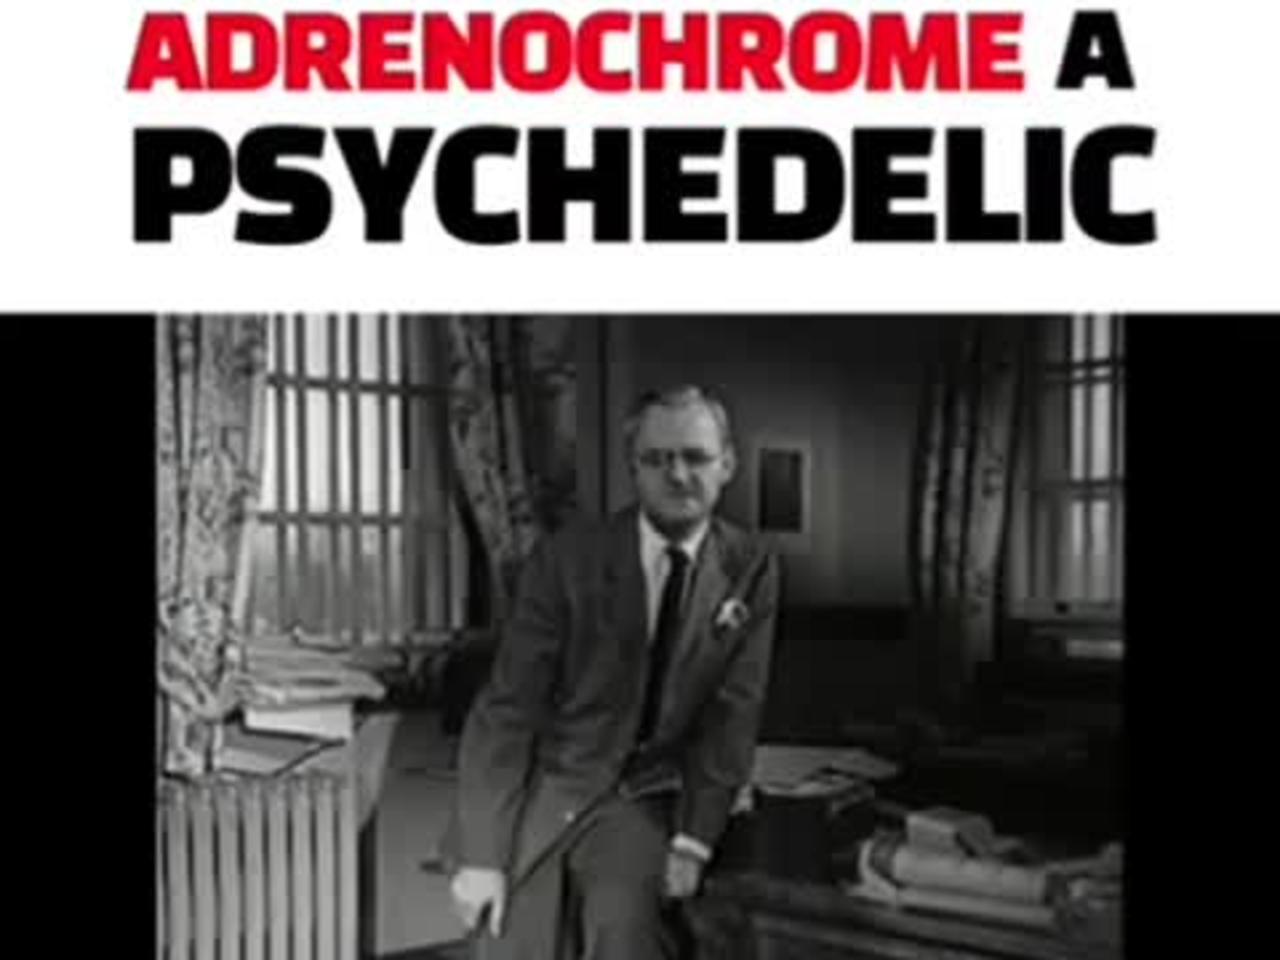 Adrenochrome A Psychedelic  form of MK Ultra Remote Viewing Enduced Schizophrenia